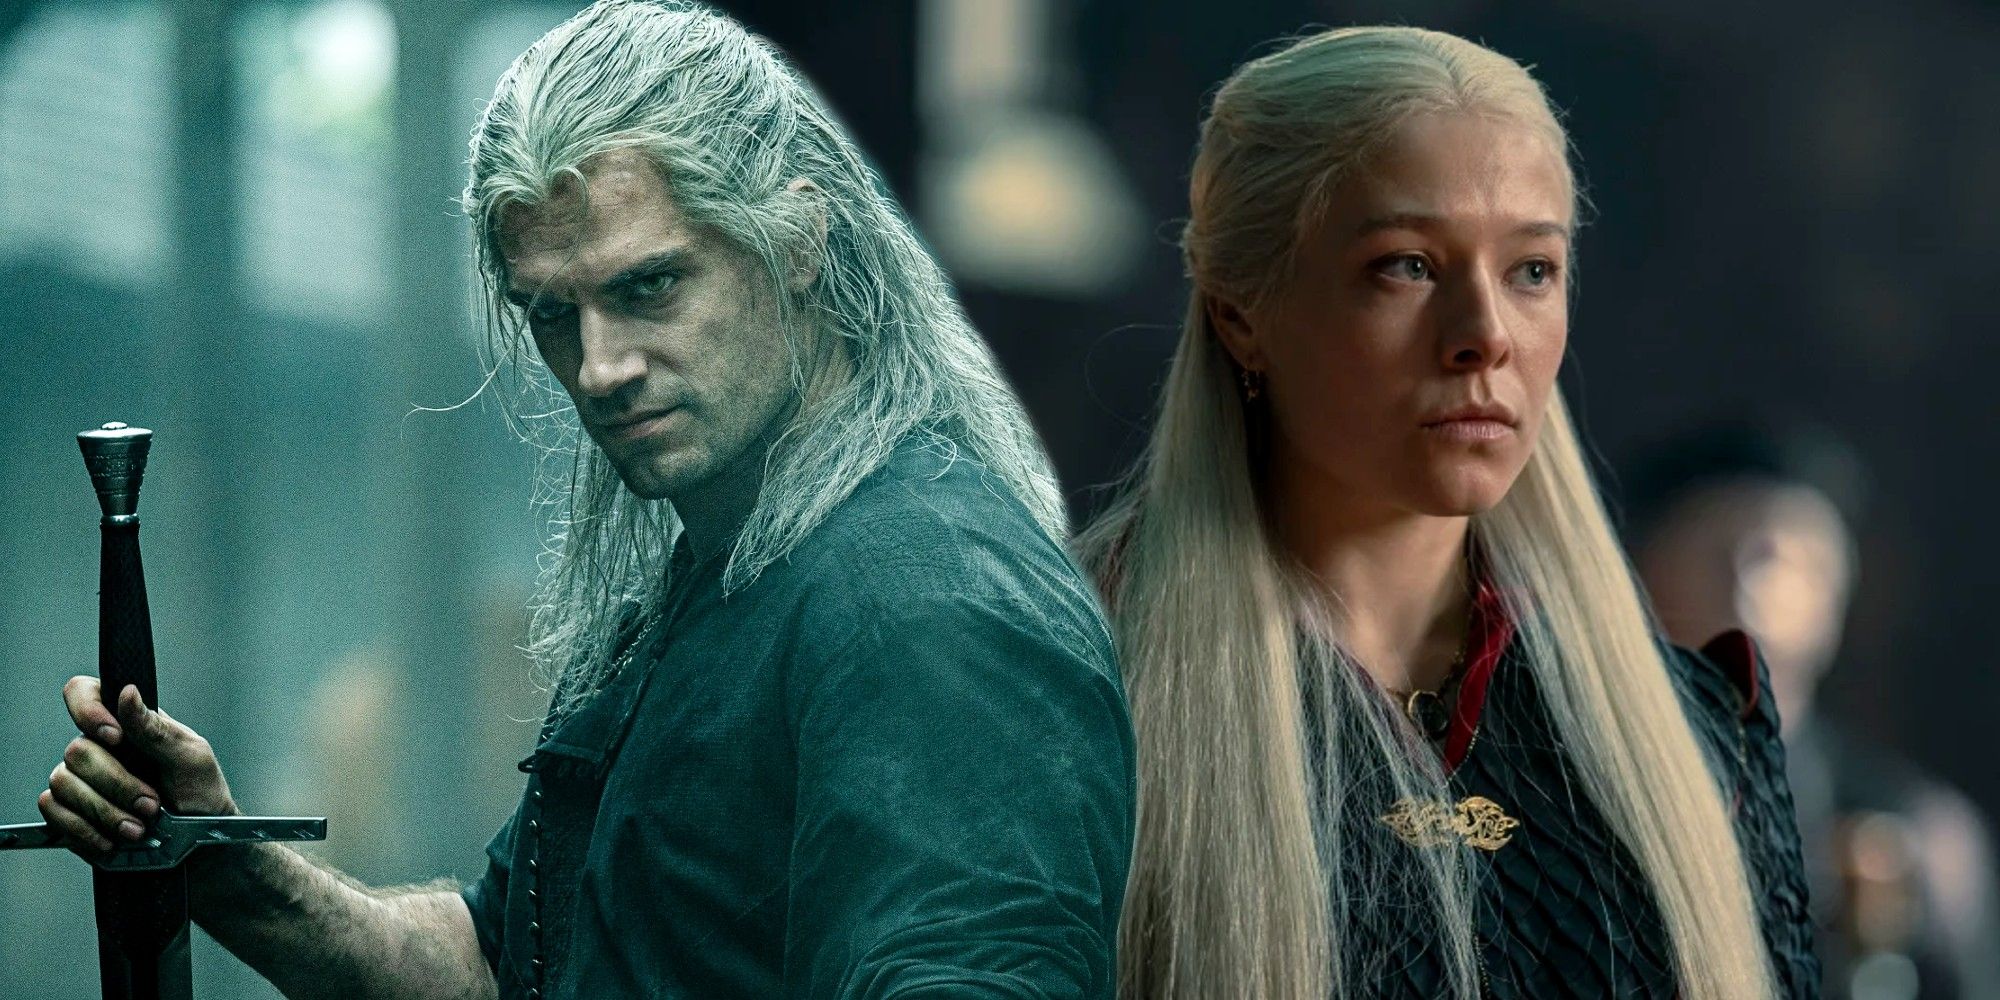 House of the Dragon Emma D'Arcy as Rhaenyra Targaryen Henry Cavill Discusses Potential Season 2 Role